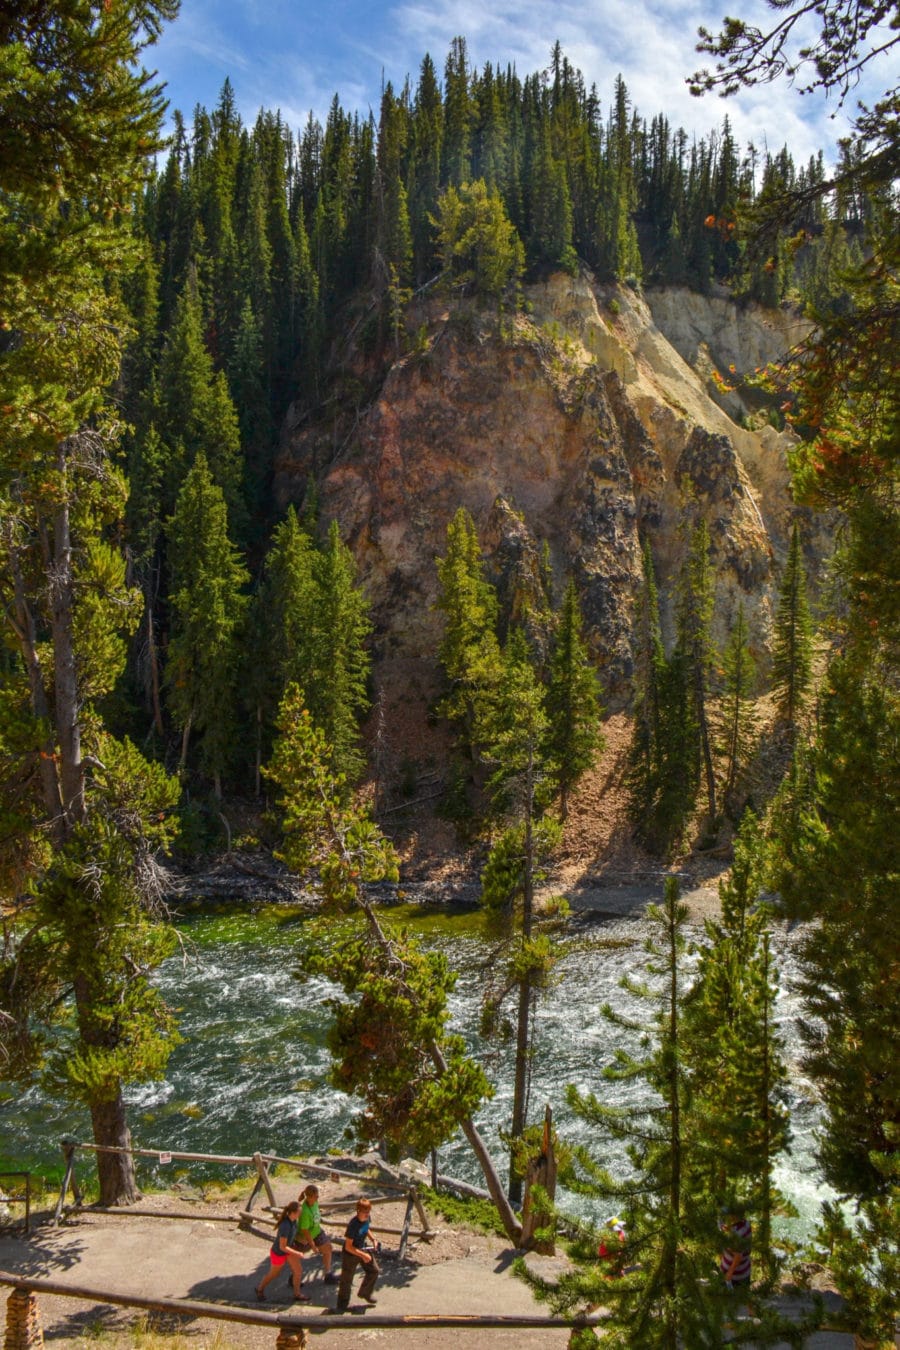 The Yellowstone River near the brink of Lower Falls